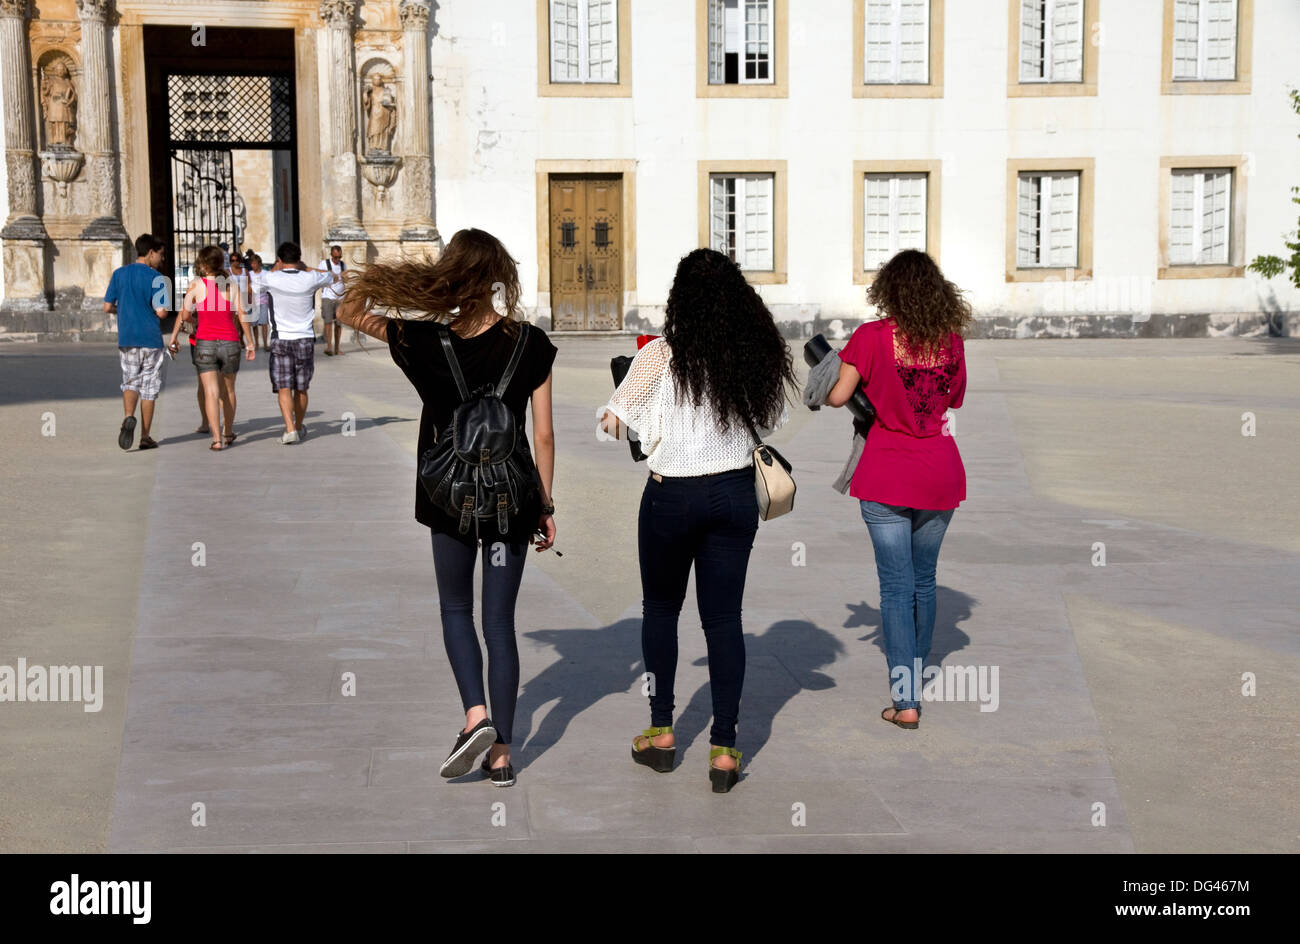 Entrance gate ( Porta Ferrea) and students in Courtyard of the old University of Coimbra, Coimbra, Portugal Stock Photo